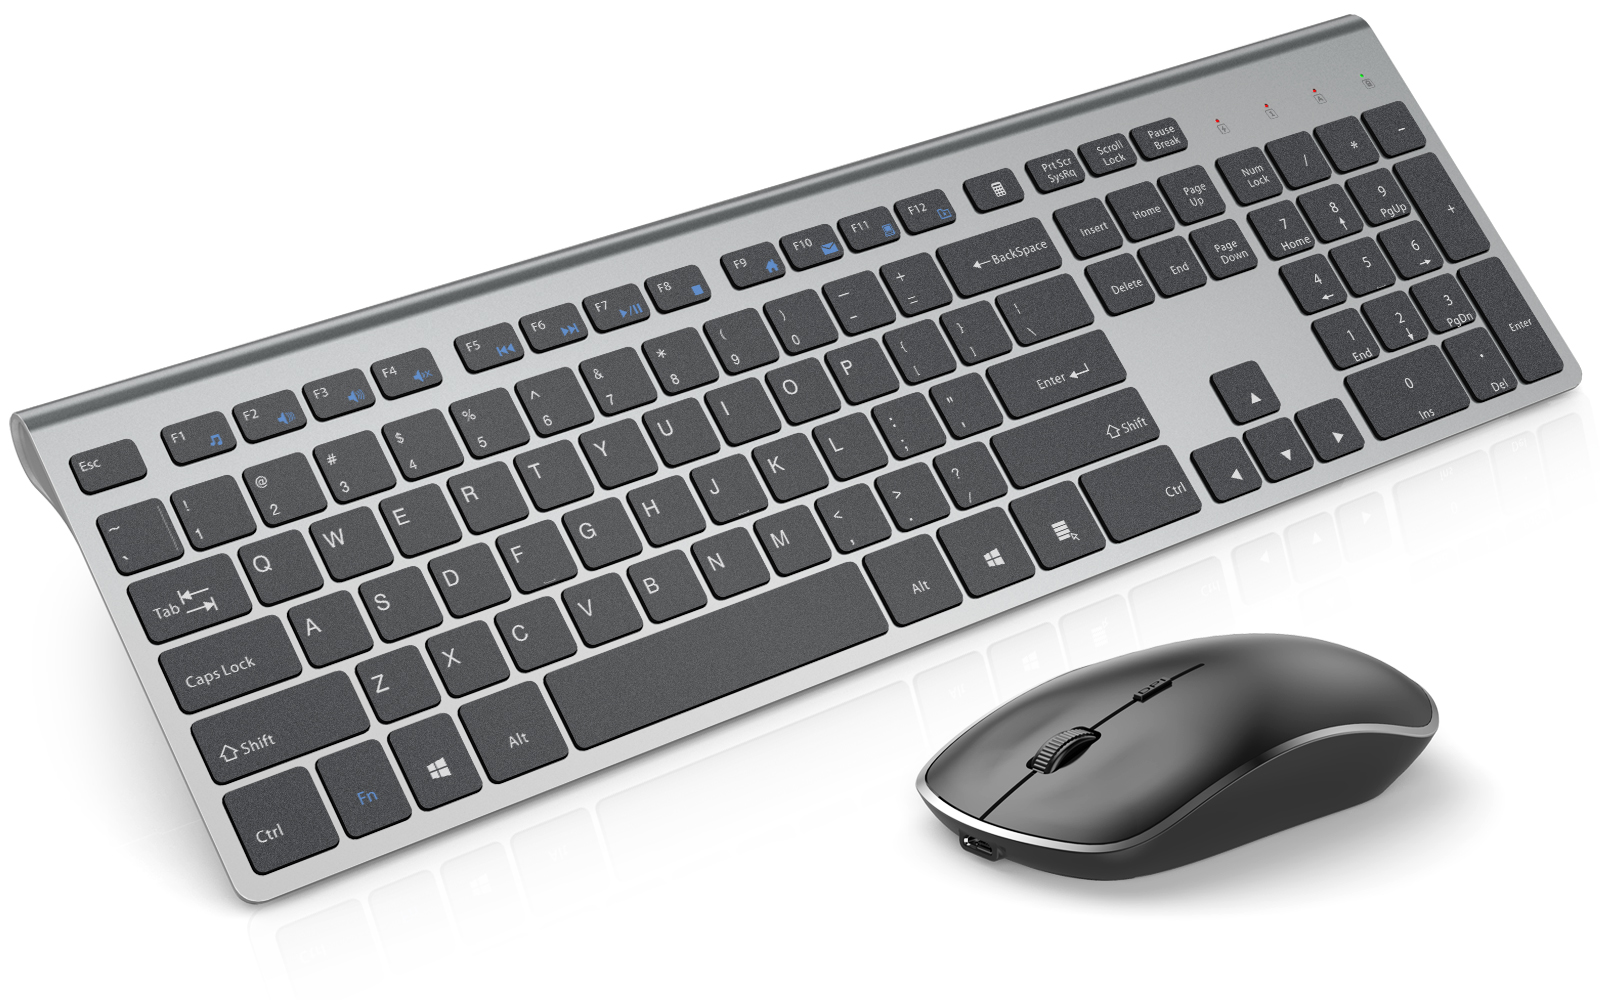 Rechargeable Wireless Keyboard Mouse Combo-J JOYACCESS 2.4G Full Size Thin Wireless Keyboard Mouse with Long Battery Life, Ergonomic and Compact Design for Laptop,PC,Desktop, Computer, Windows- Grey